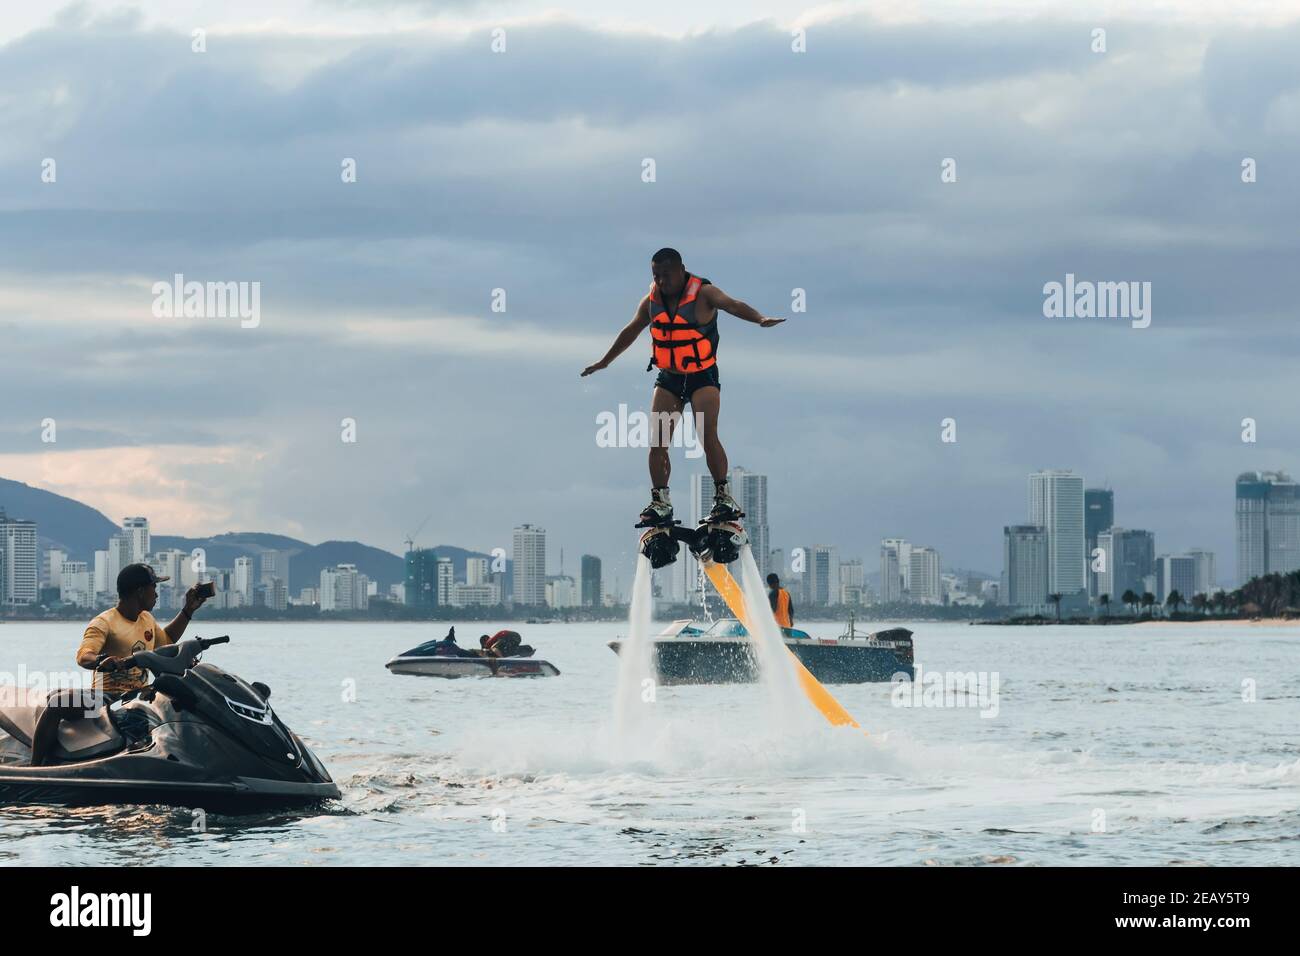 VINPEARL RESORT, NHA TRANG, VIETNAM - 05.01.2019: The new spectacular  sport, the flyboard is showed in the coast of beach on the sunset. Man on  flyboa Stock Photo - Alamy